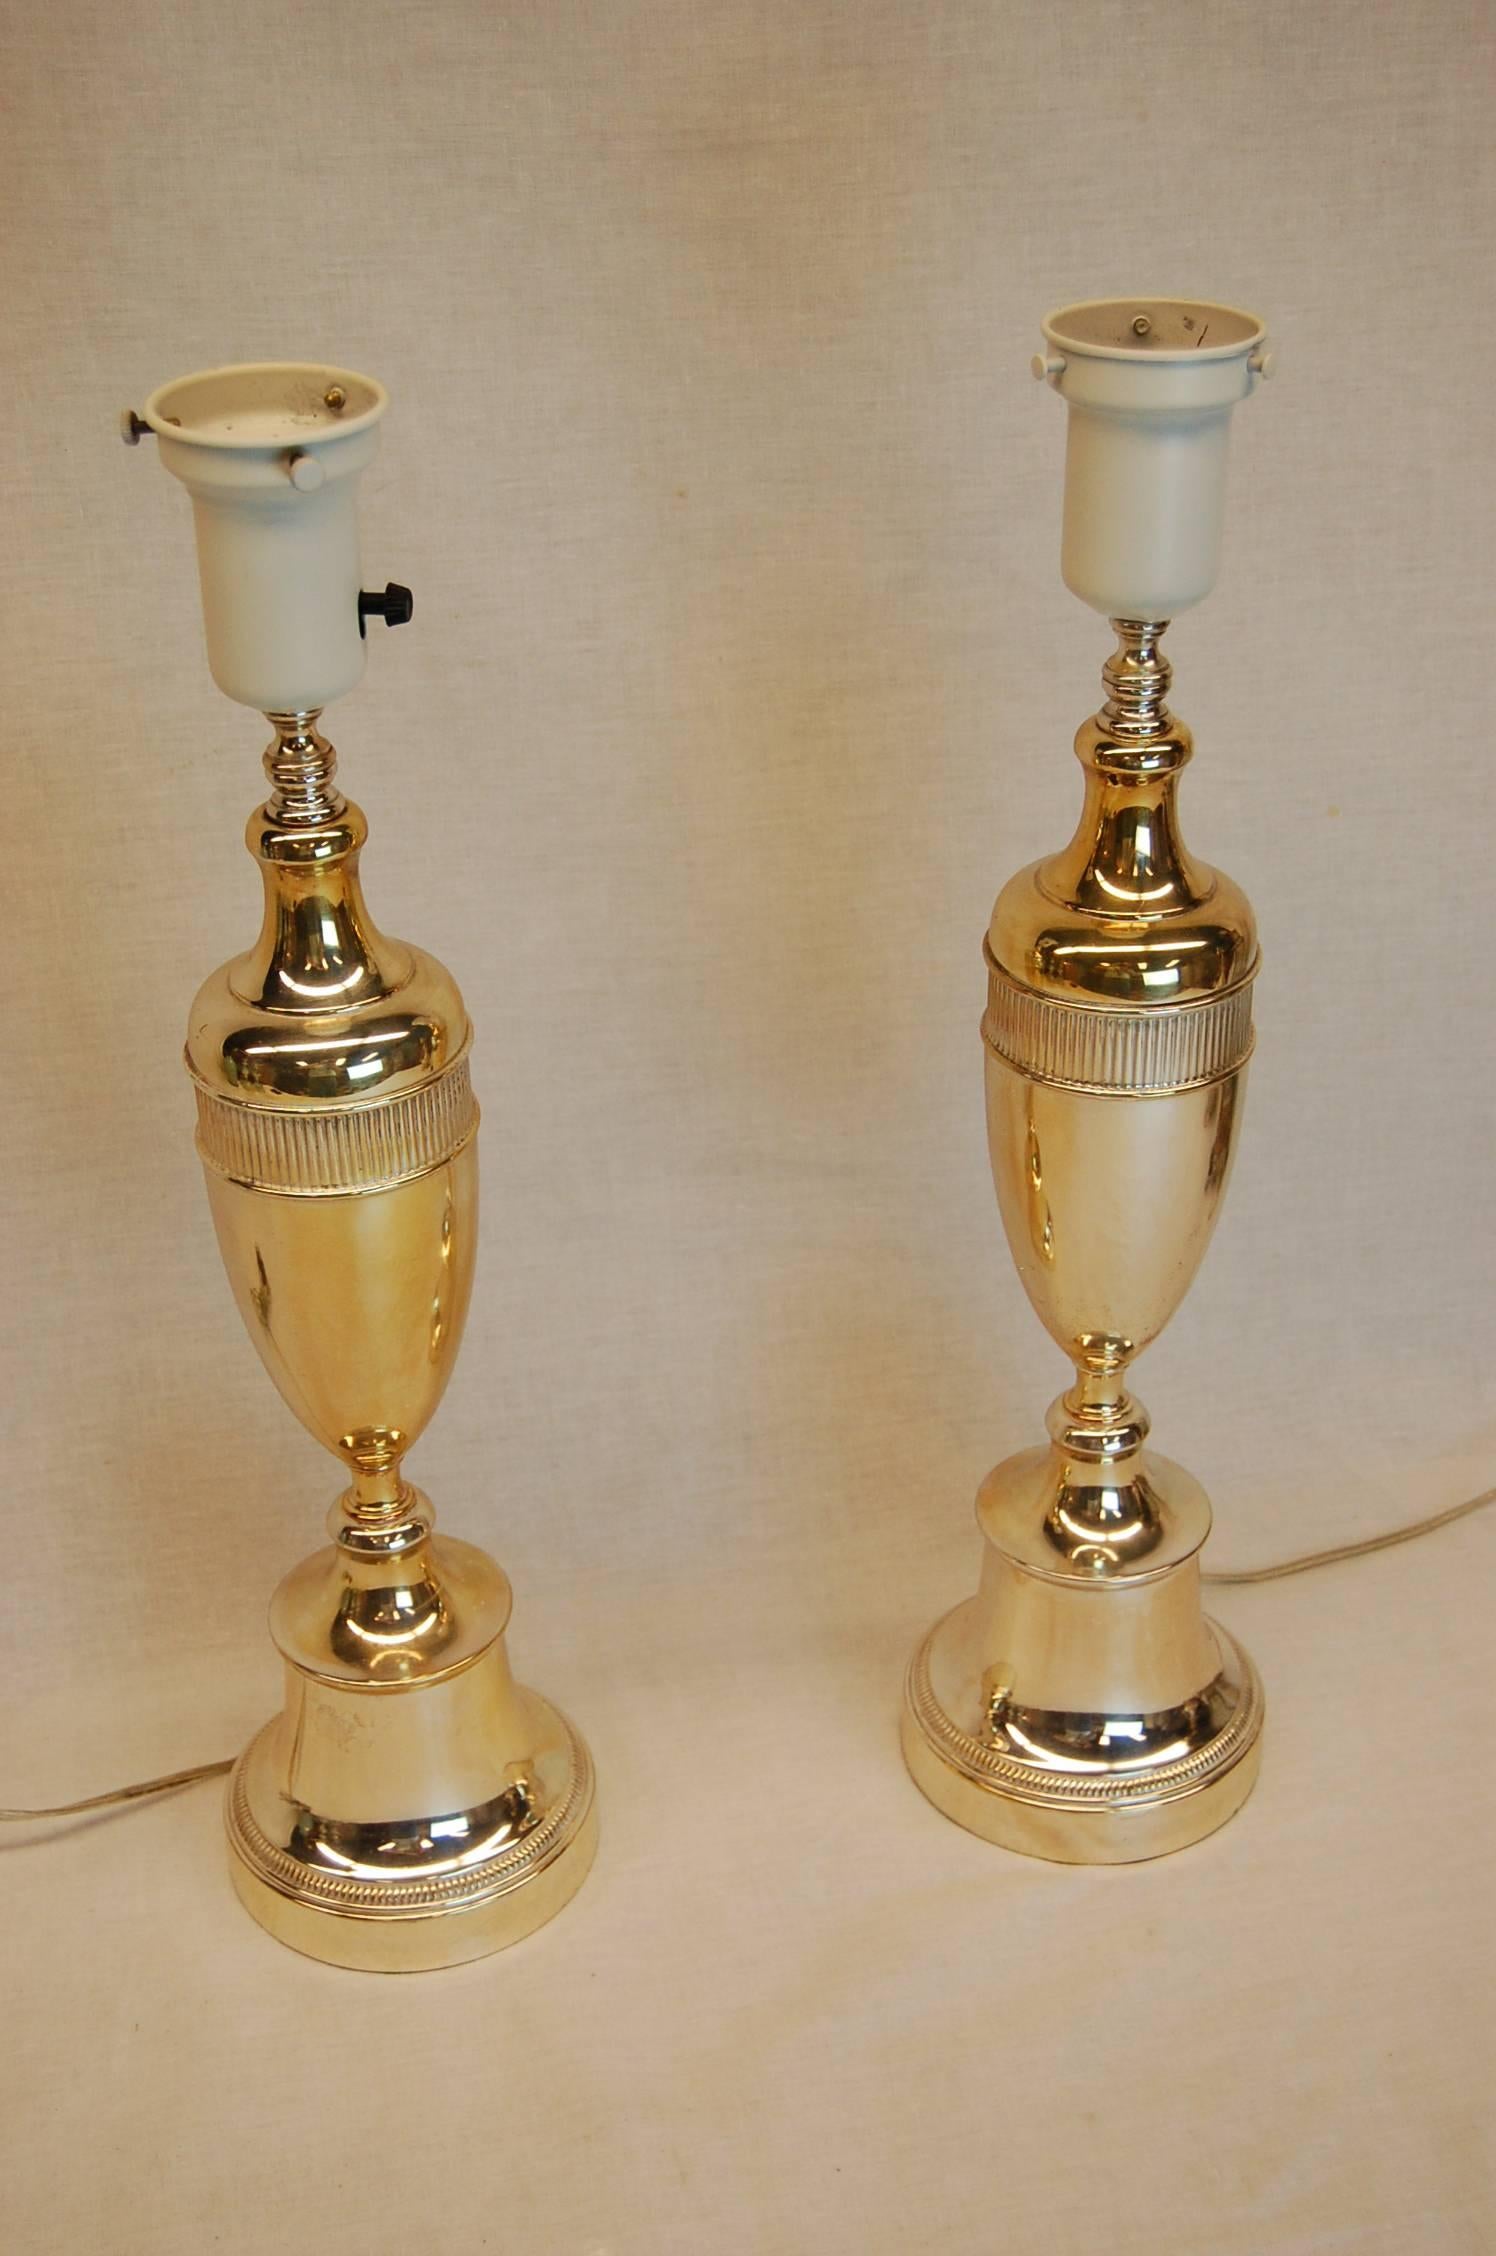 Pair of Art Deco Period Silver Plated Urn Lamps, circa 1940s In Good Condition For Sale In Pittsburgh, PA